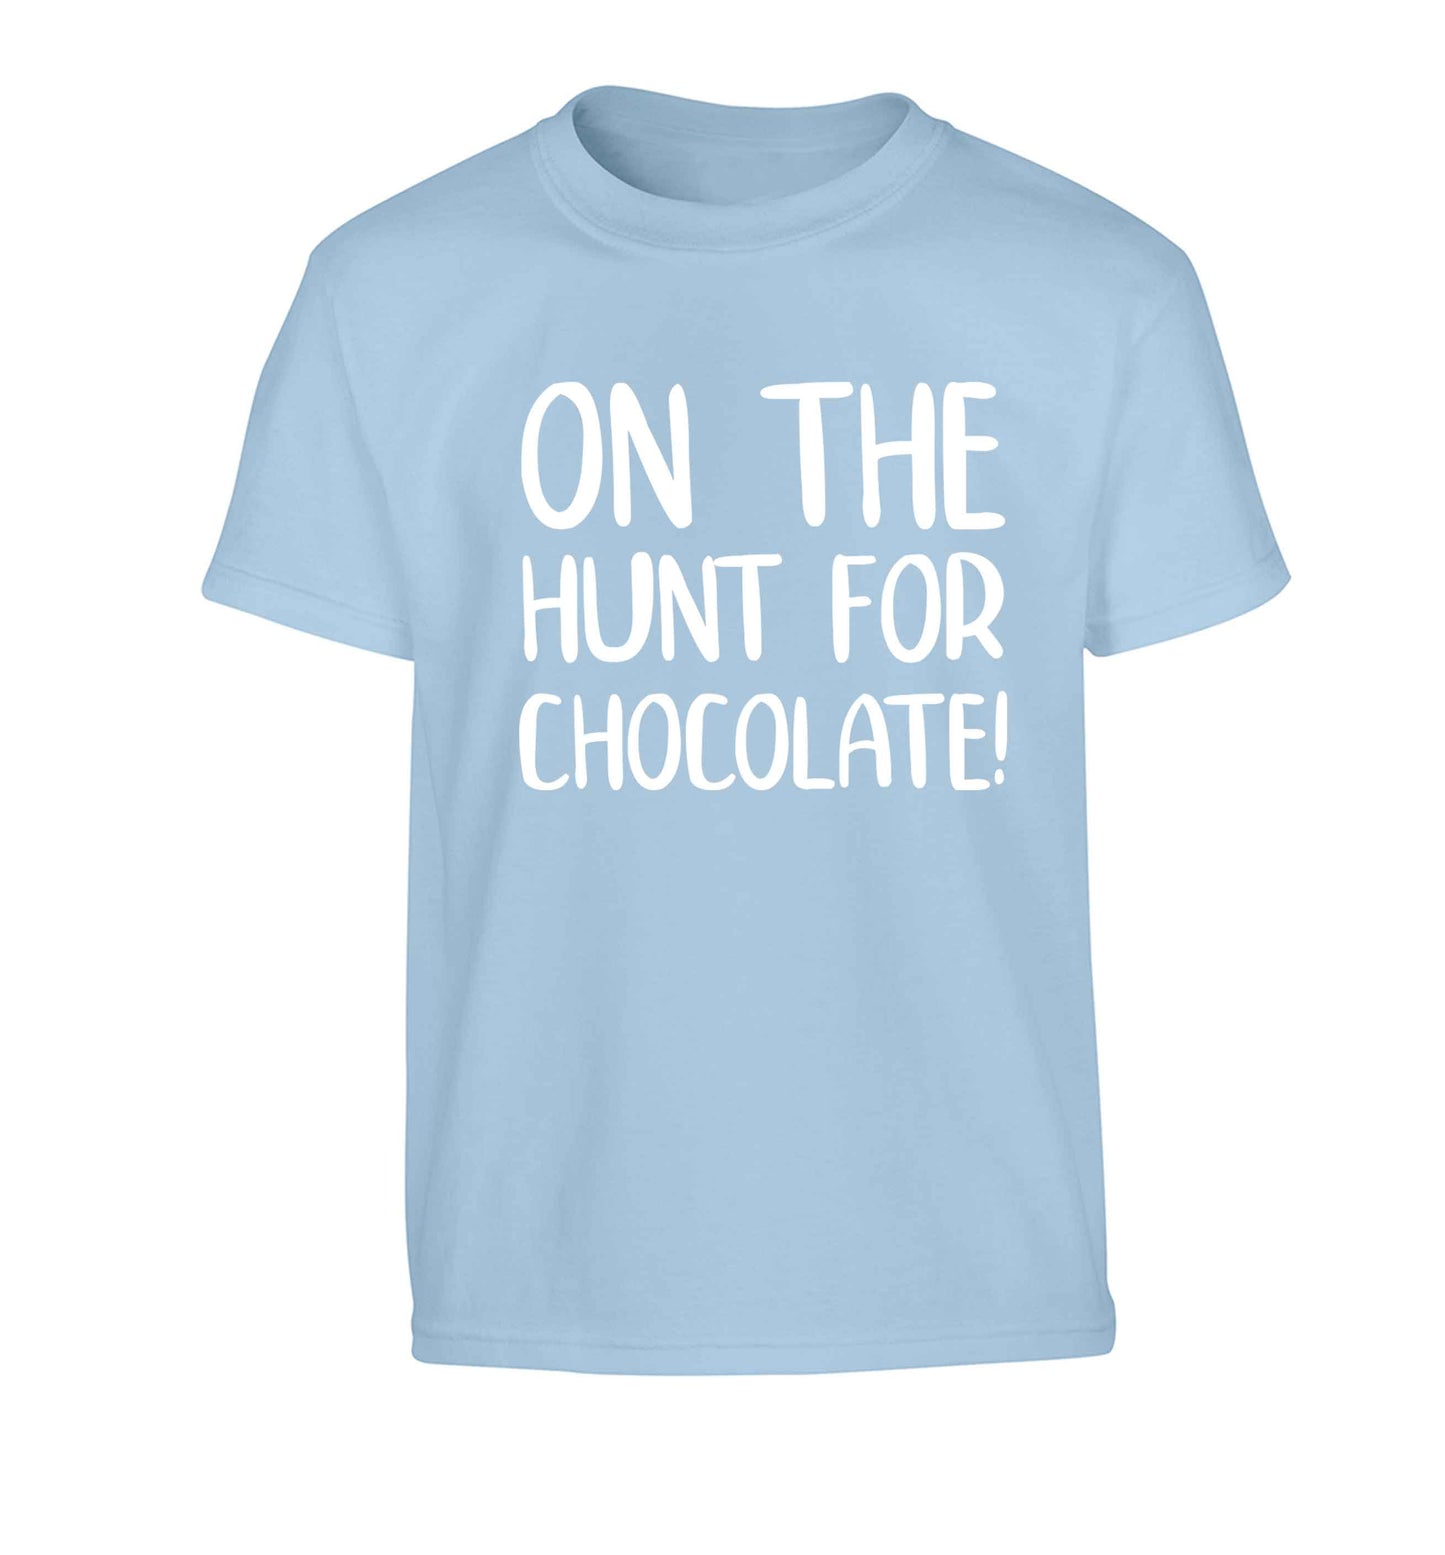 On the hunt for chocolate! Children's light blue Tshirt 12-13 Years